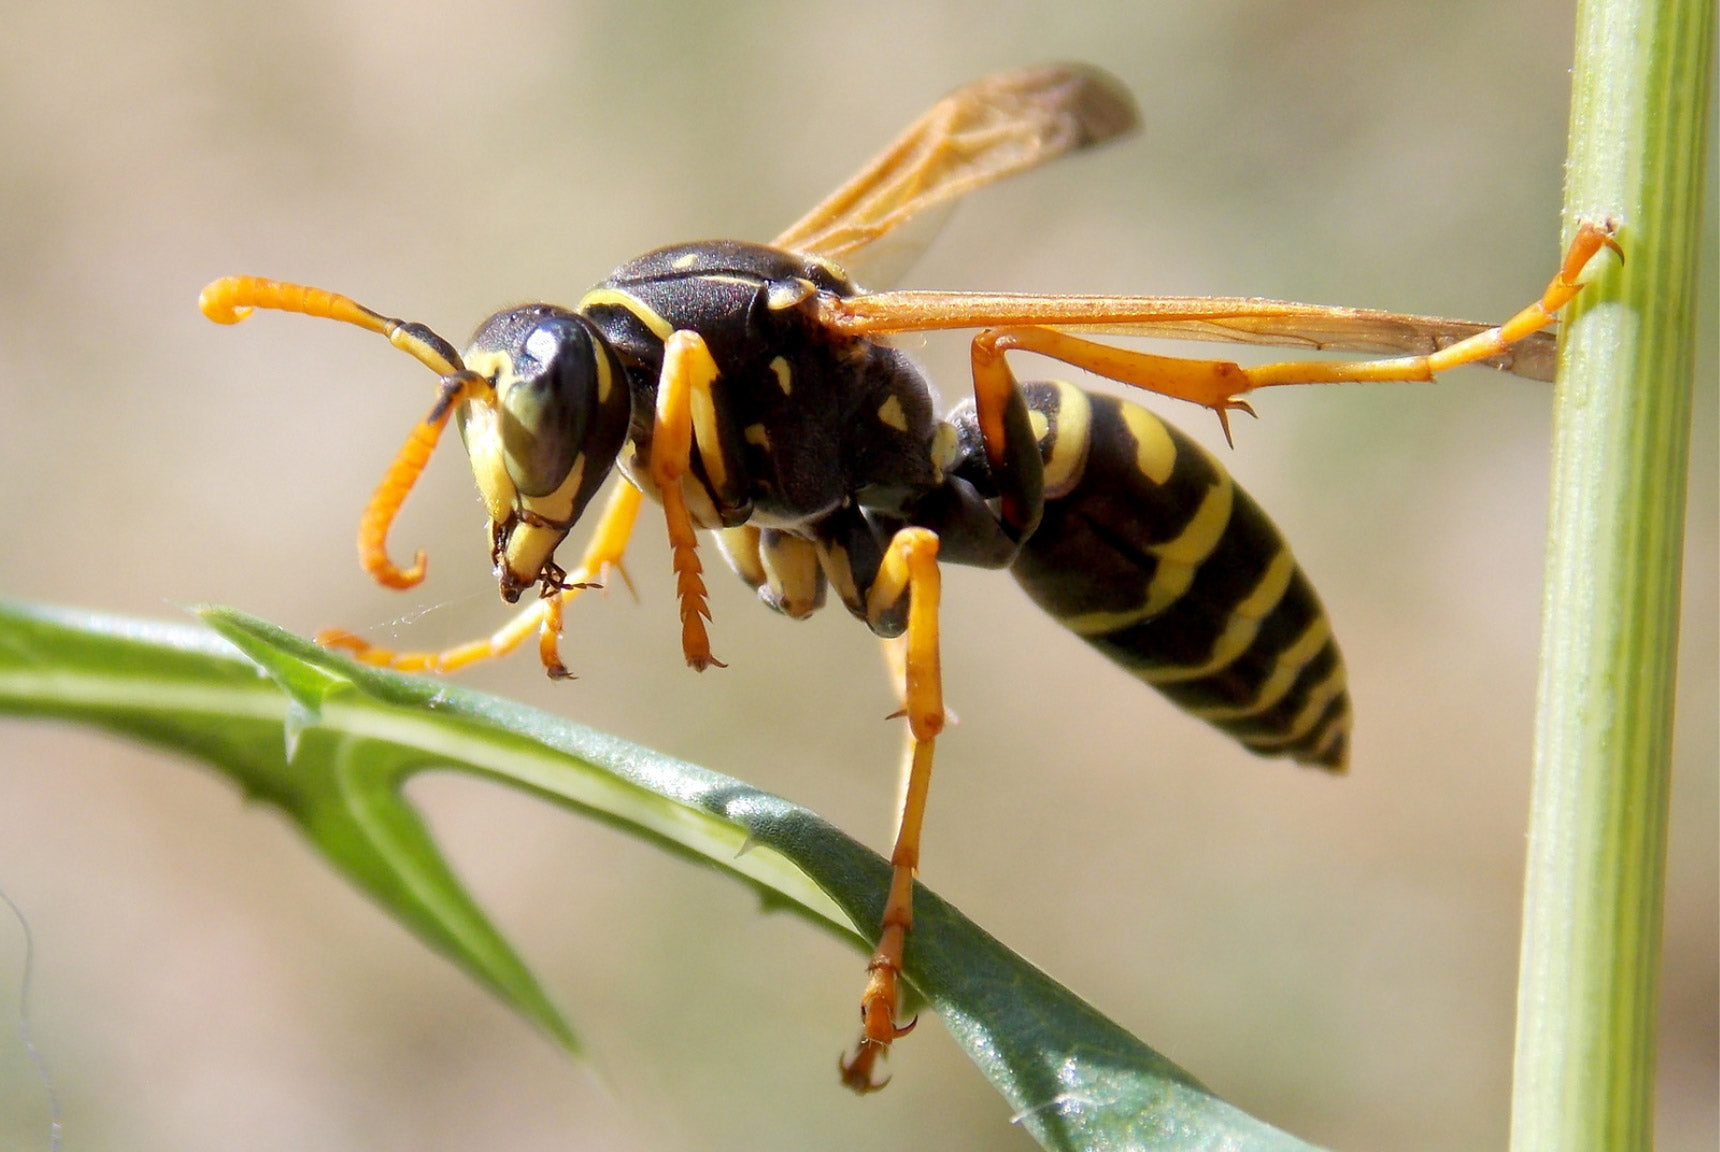 How to prevent wasps from nesting in or around your home.